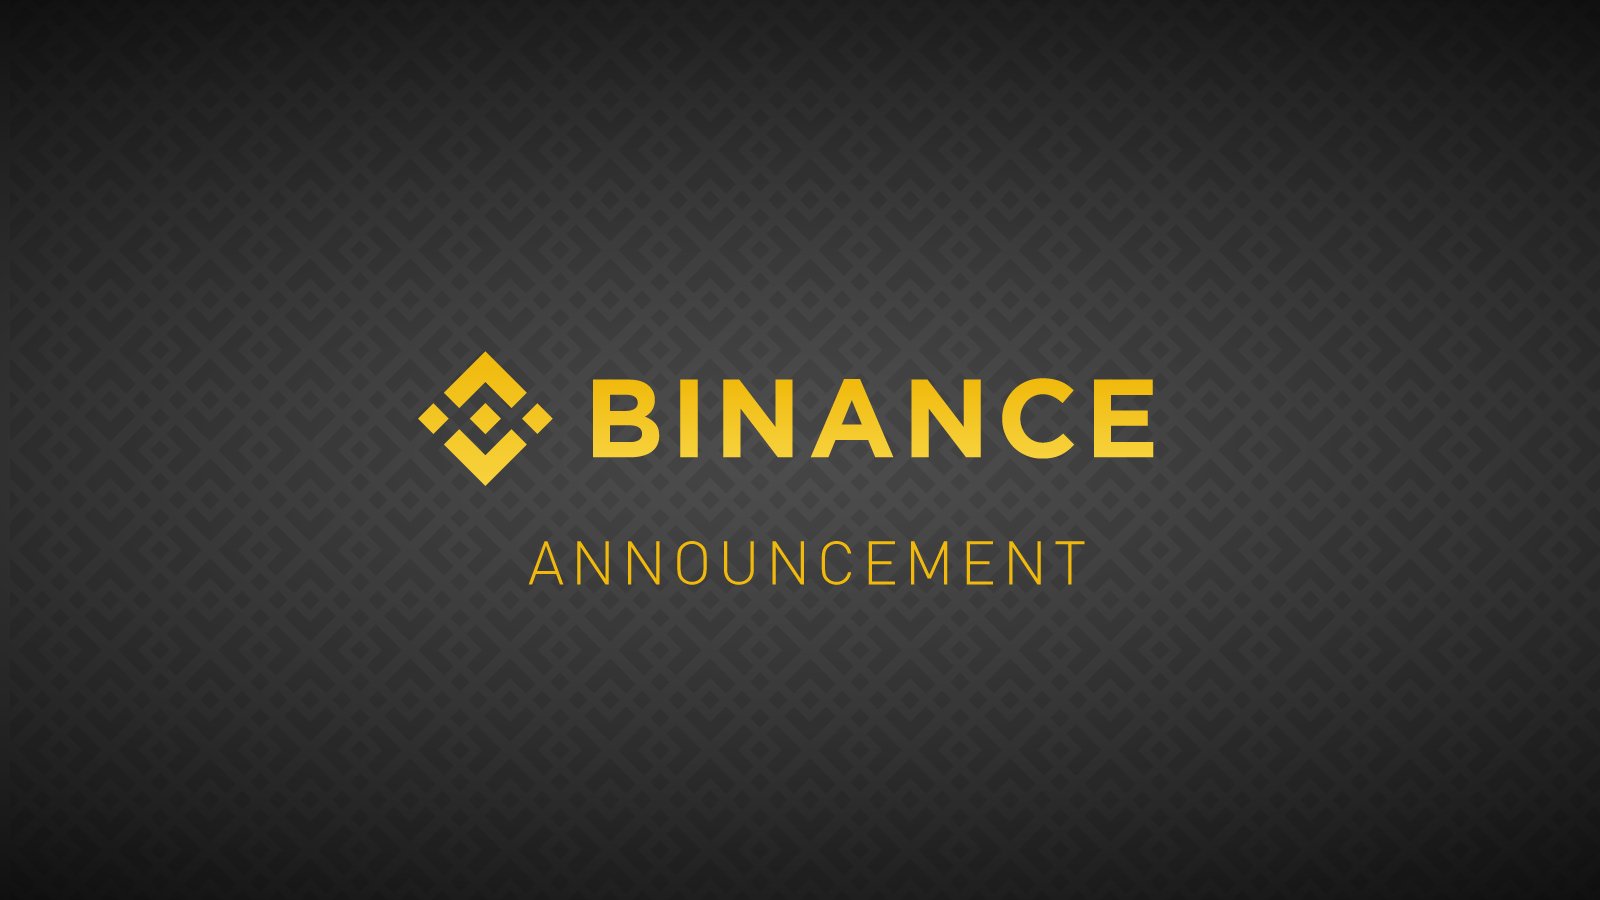 Binance Has Been Hacked By 7000 BTC - CryptoCoins Way